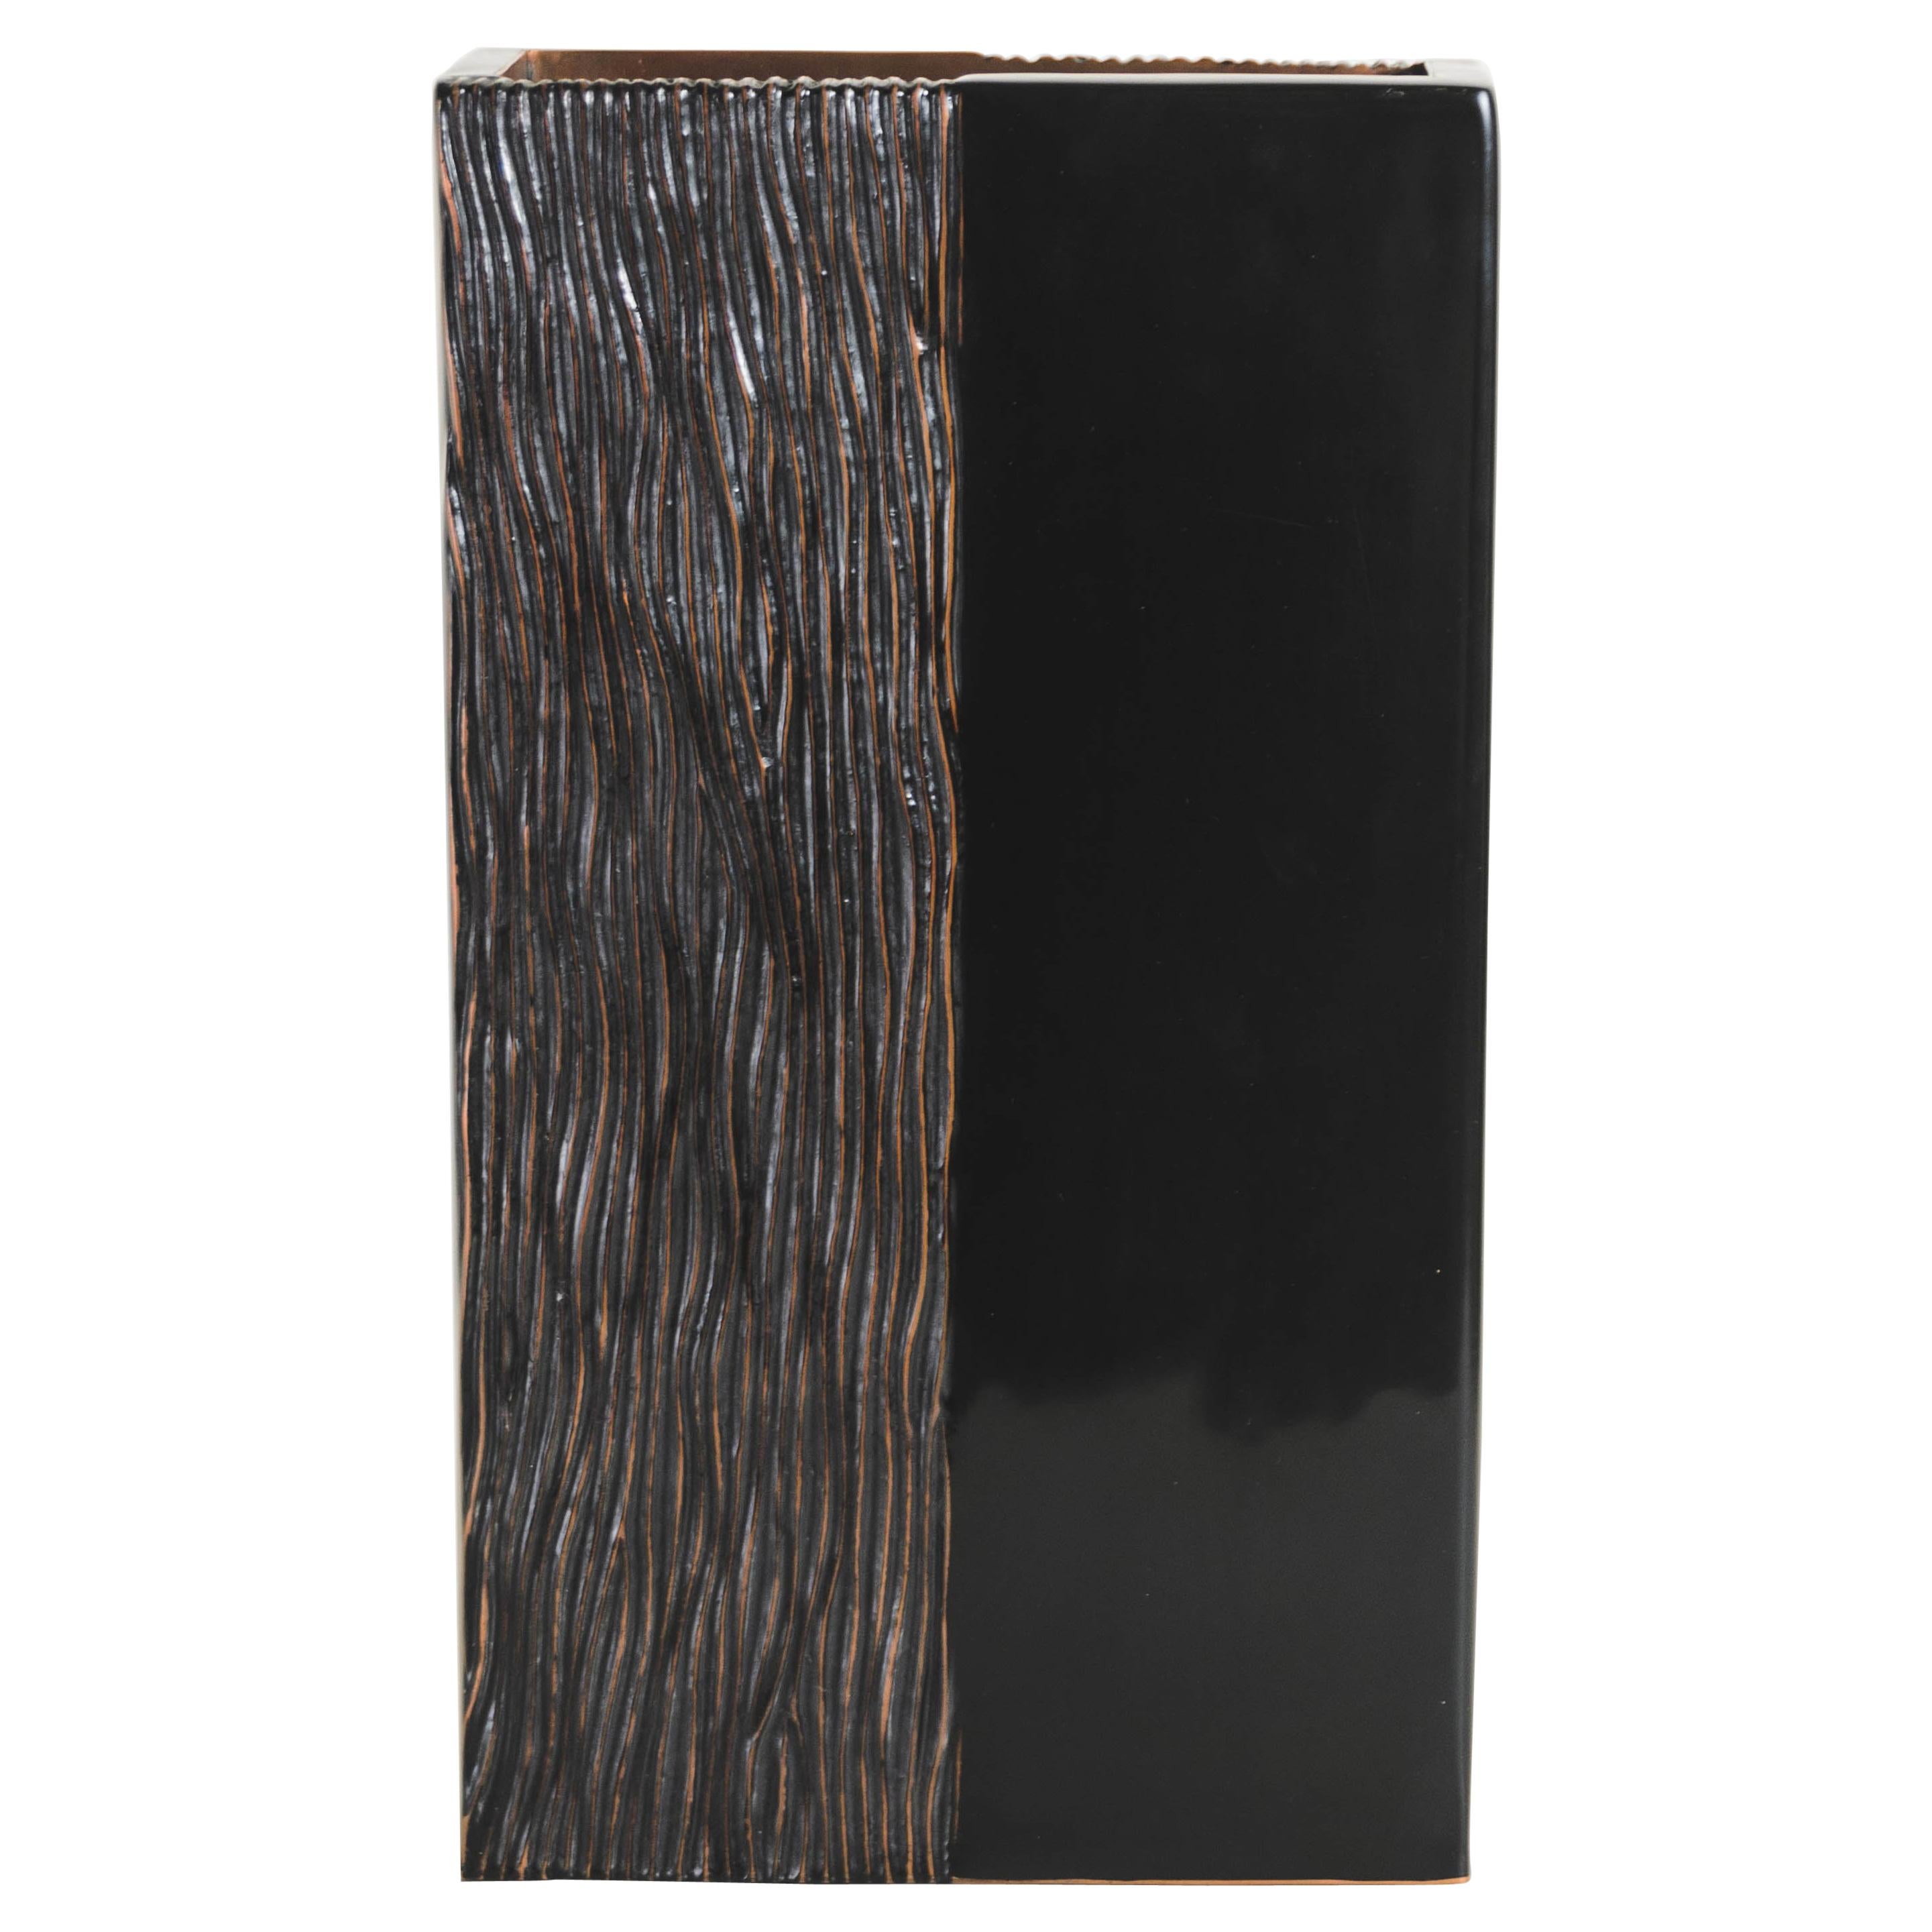 Contemporary Block Vase w/ Pleats Design in Black Lacquer by Robert Kuo For Sale